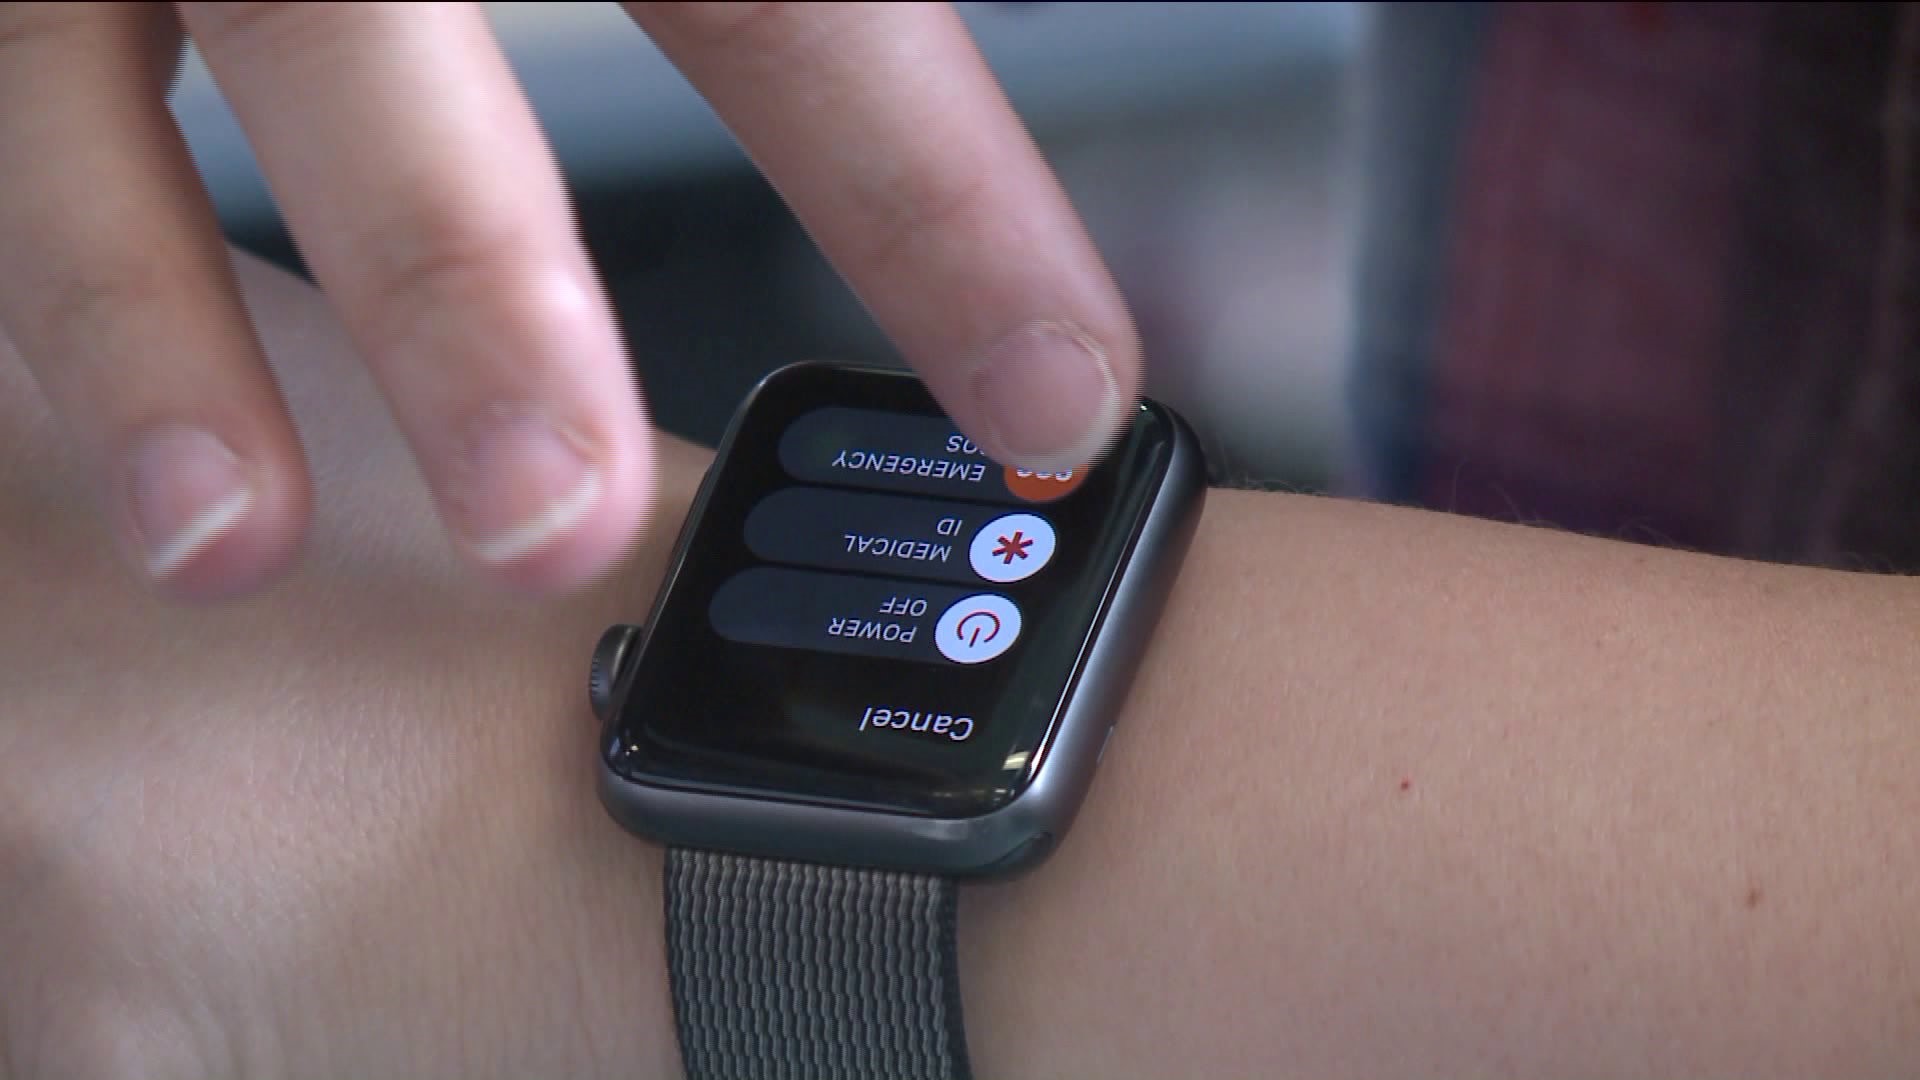 911 centers dealing with false calls from Apple watches